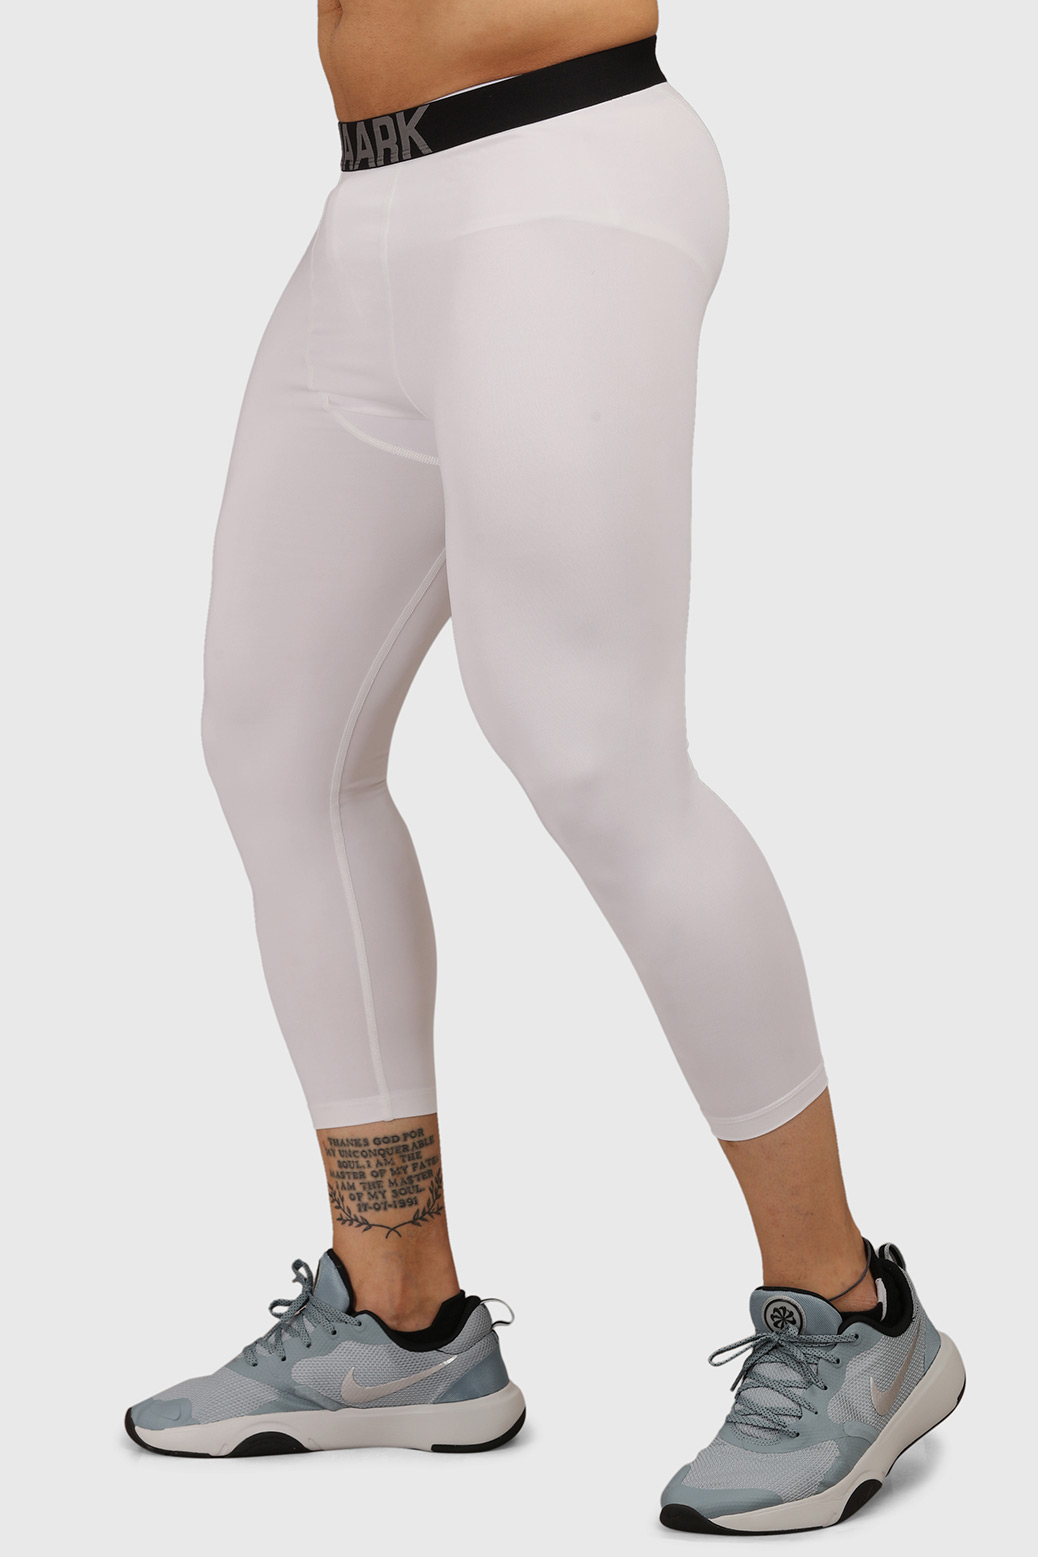 Fuaark Gym Compression White Tights  Buy Tights For Men Online in New  Zealand